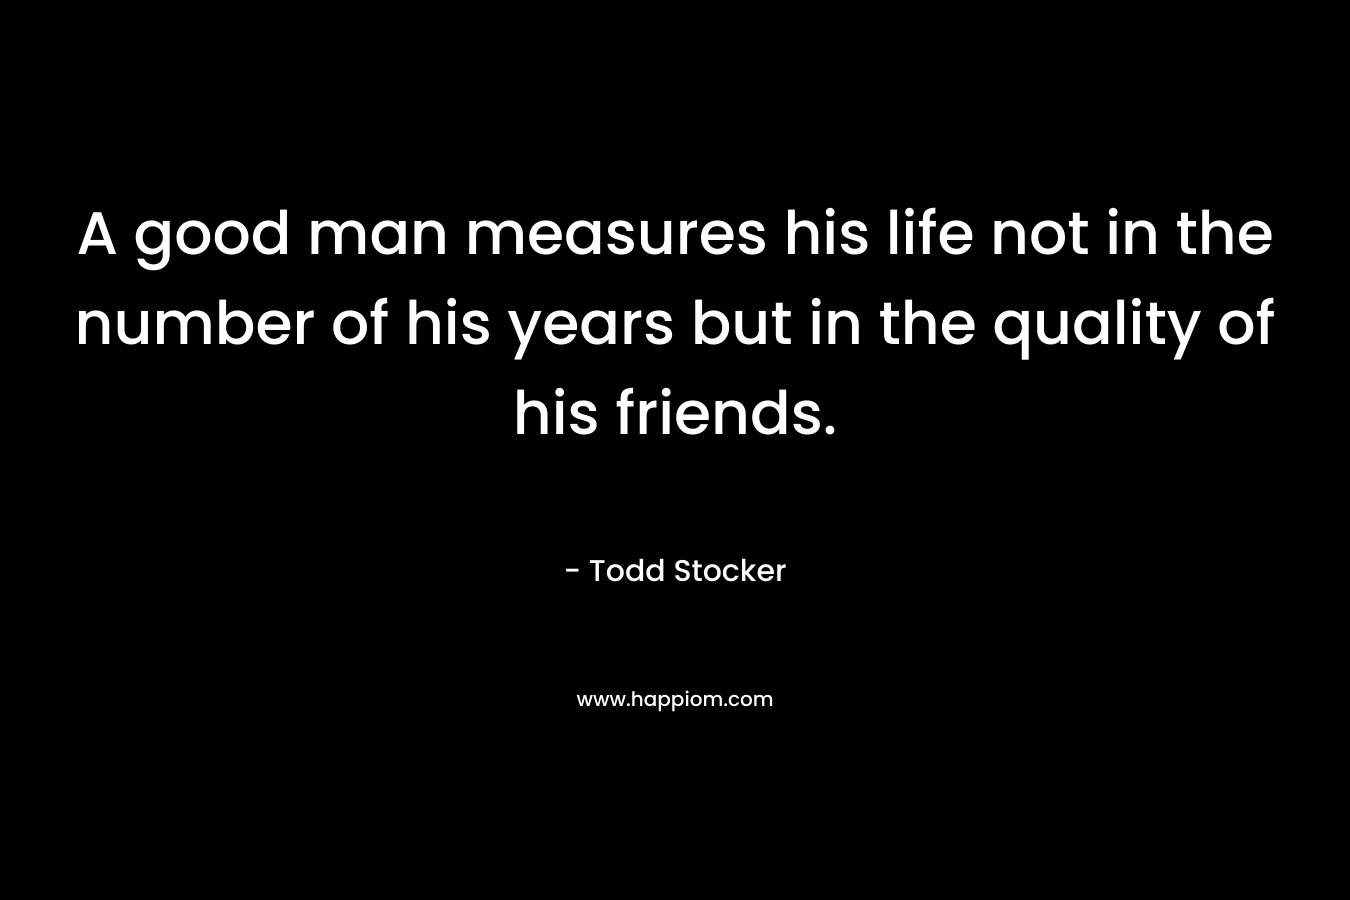 A good man measures his life not in the number of his years but in the quality of his friends.